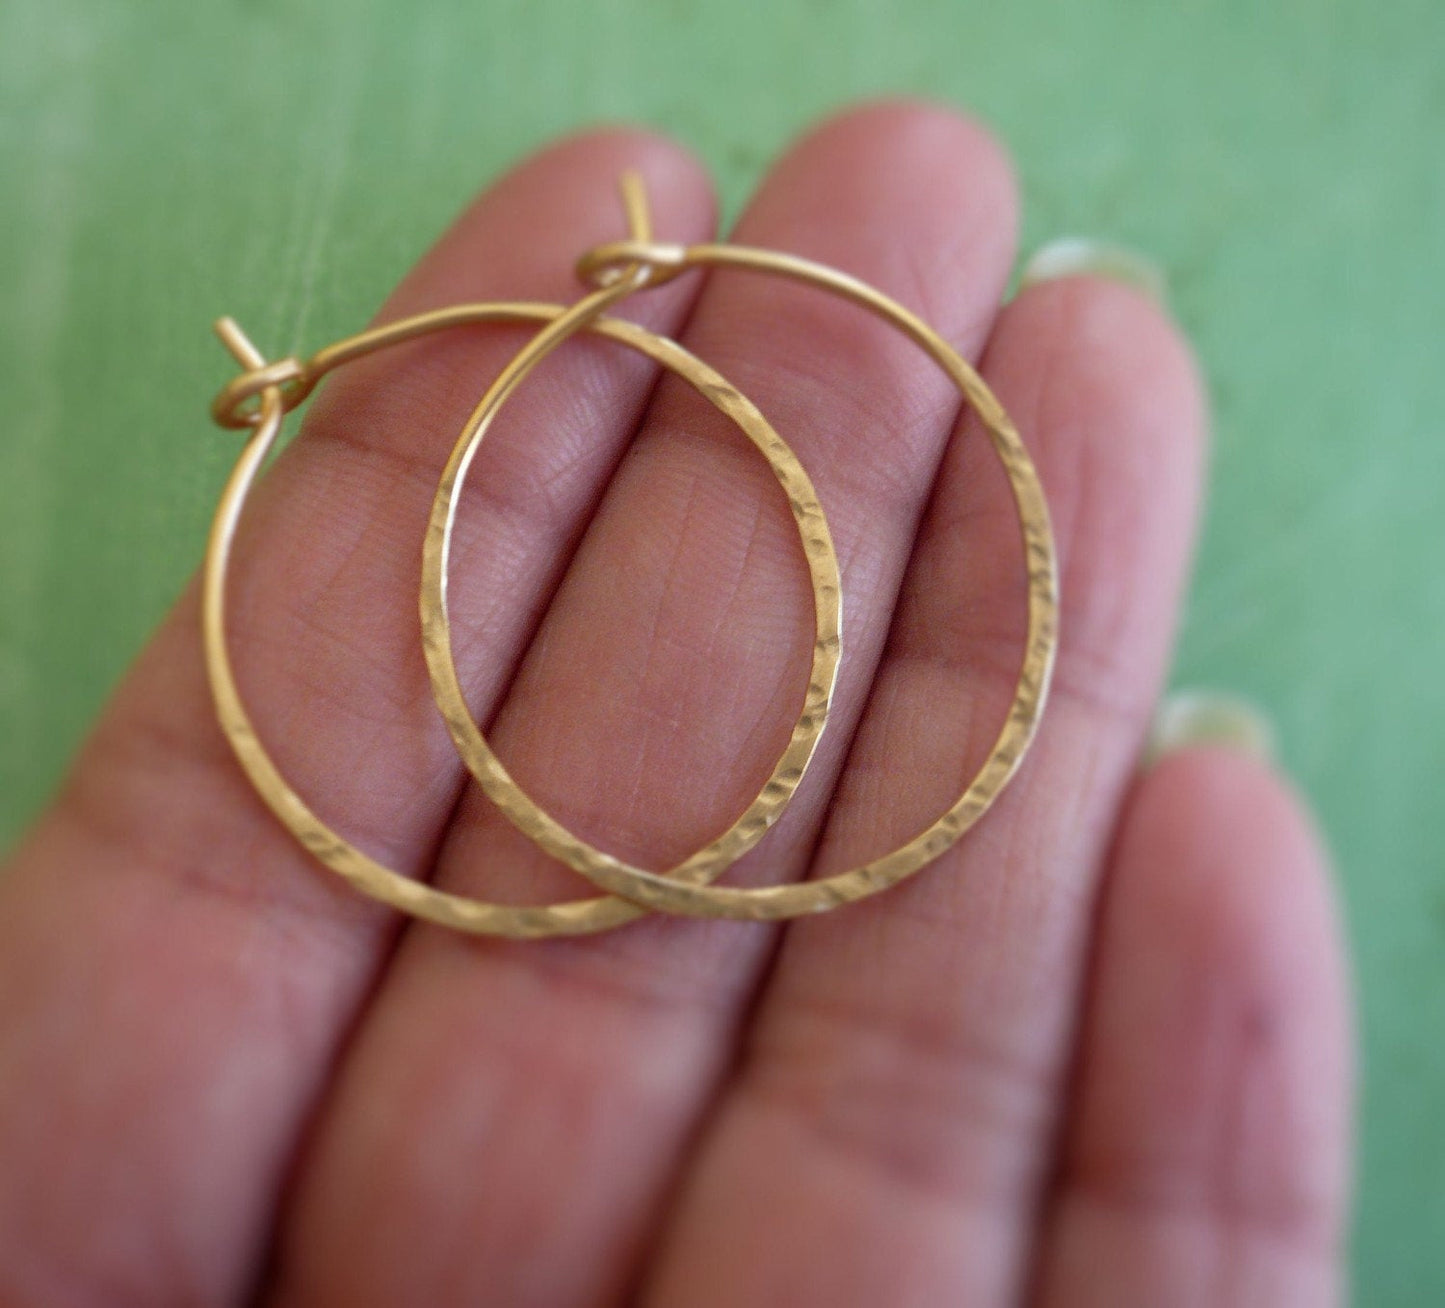 Mangly Hoops in Gold - Choice of 6 sizes. Handmade. Hammered. 14k goldfill hoops